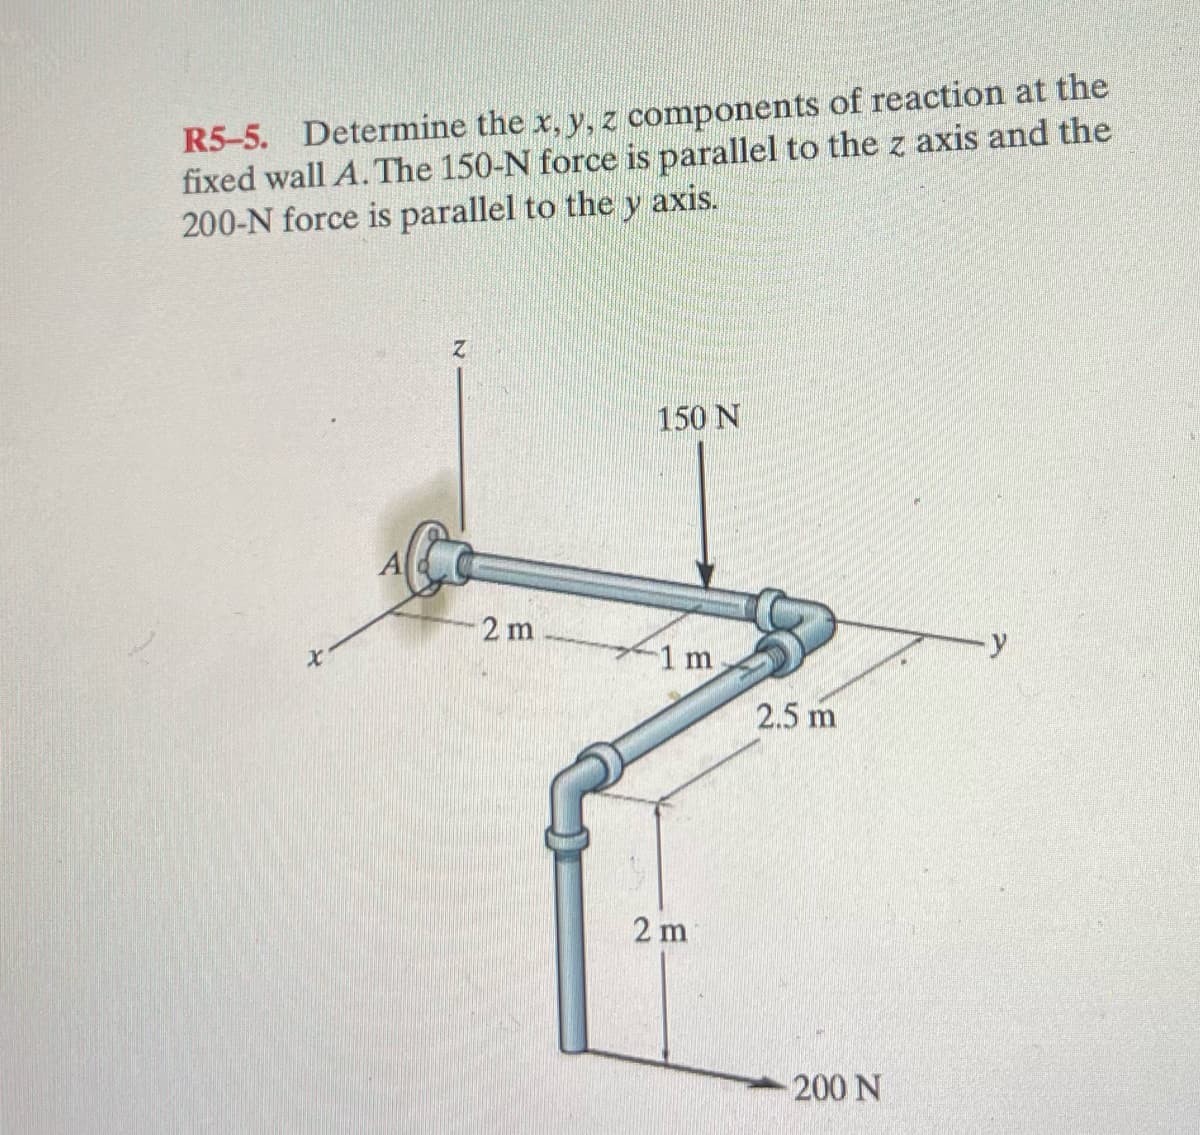 R5-5. Determine the x, y, z components of reaction at the
fixed wall A. The 150-N force is parallel to the z axis and the
200-N force is parallel to the y axis.
x
Z
2 m
150 N
1 m
2 m
2.5 m
-200 N